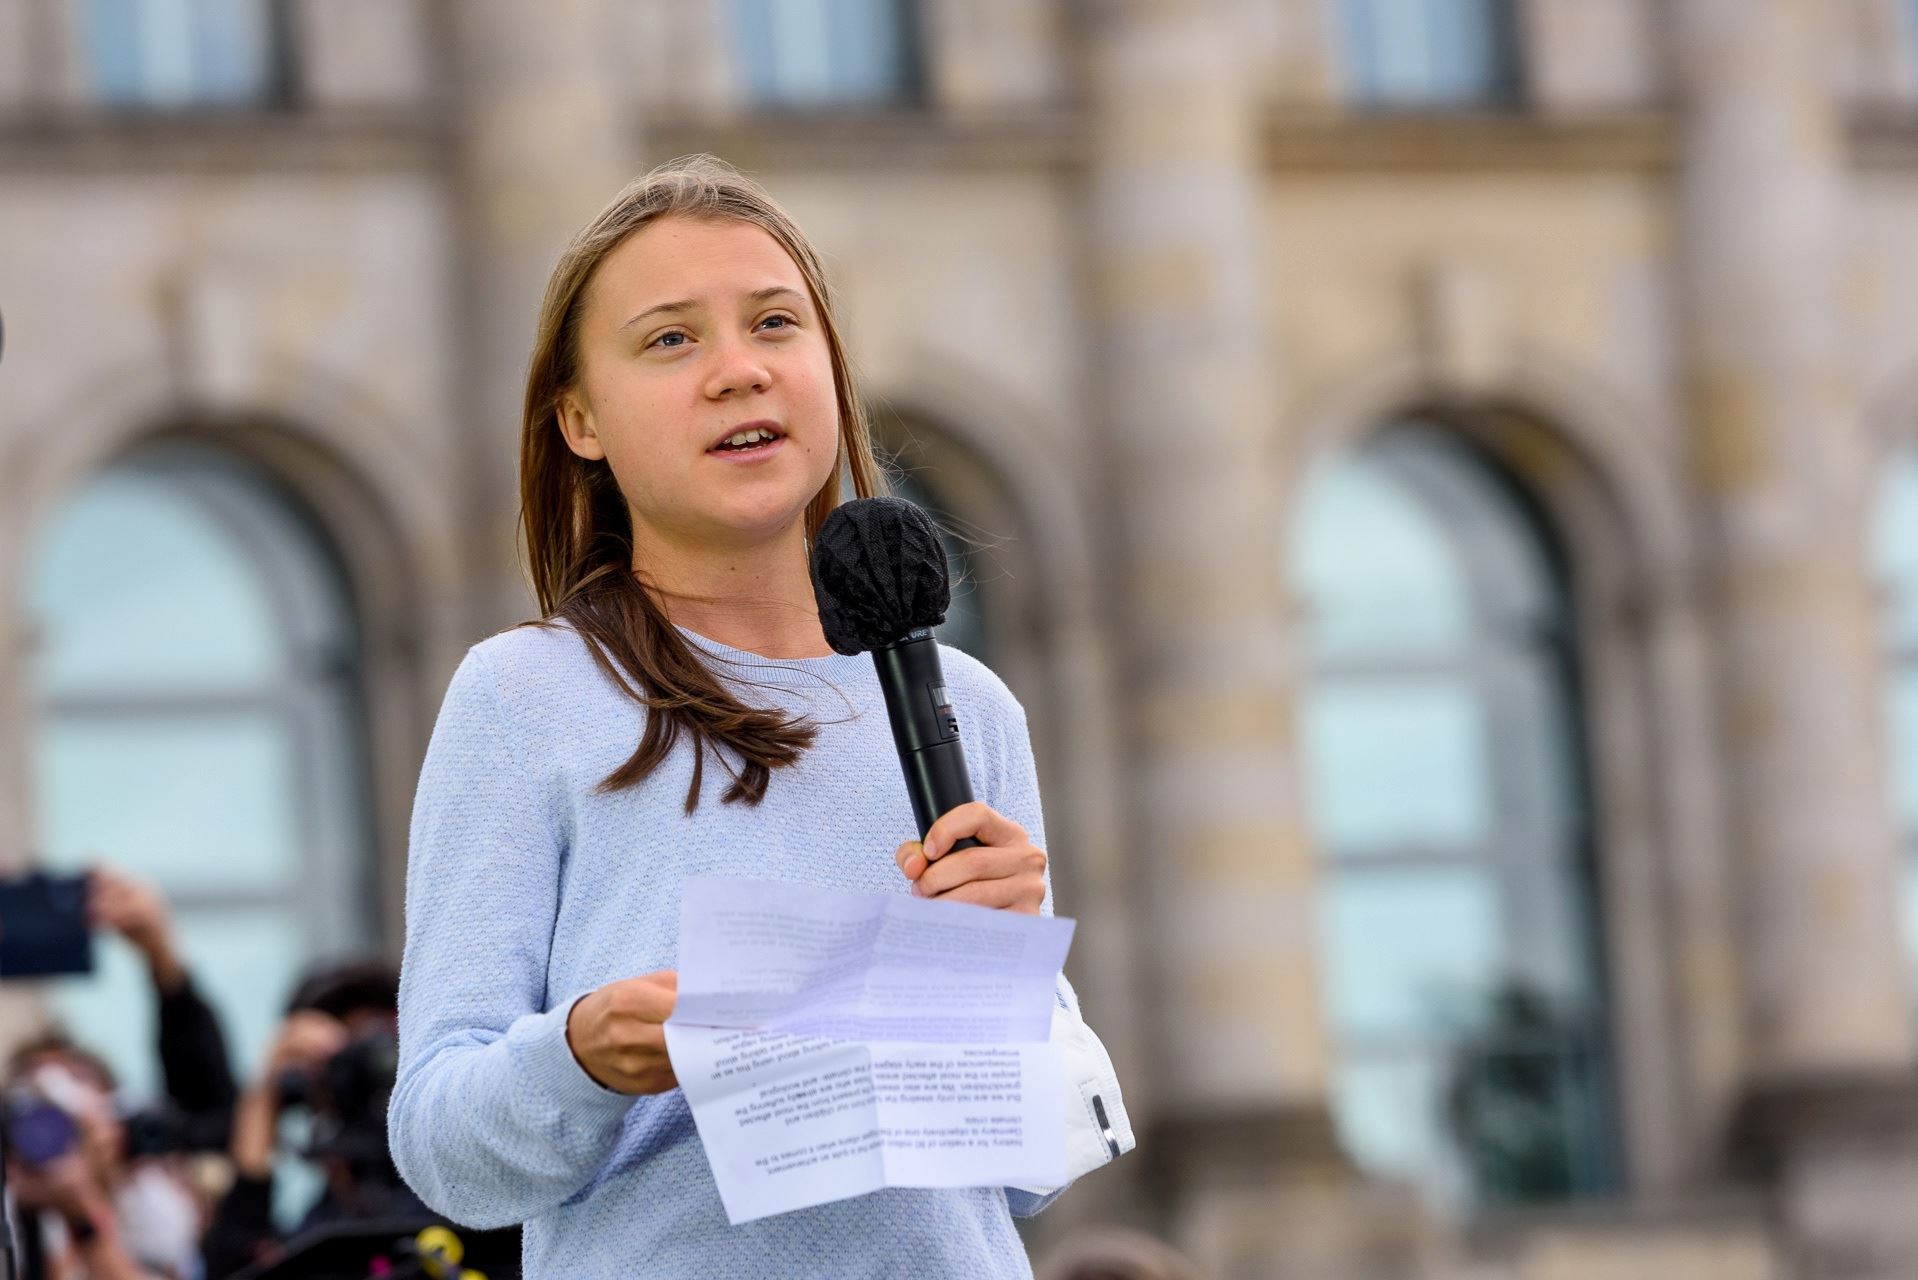 Greta Thunberg has become a target for climate change deniers.